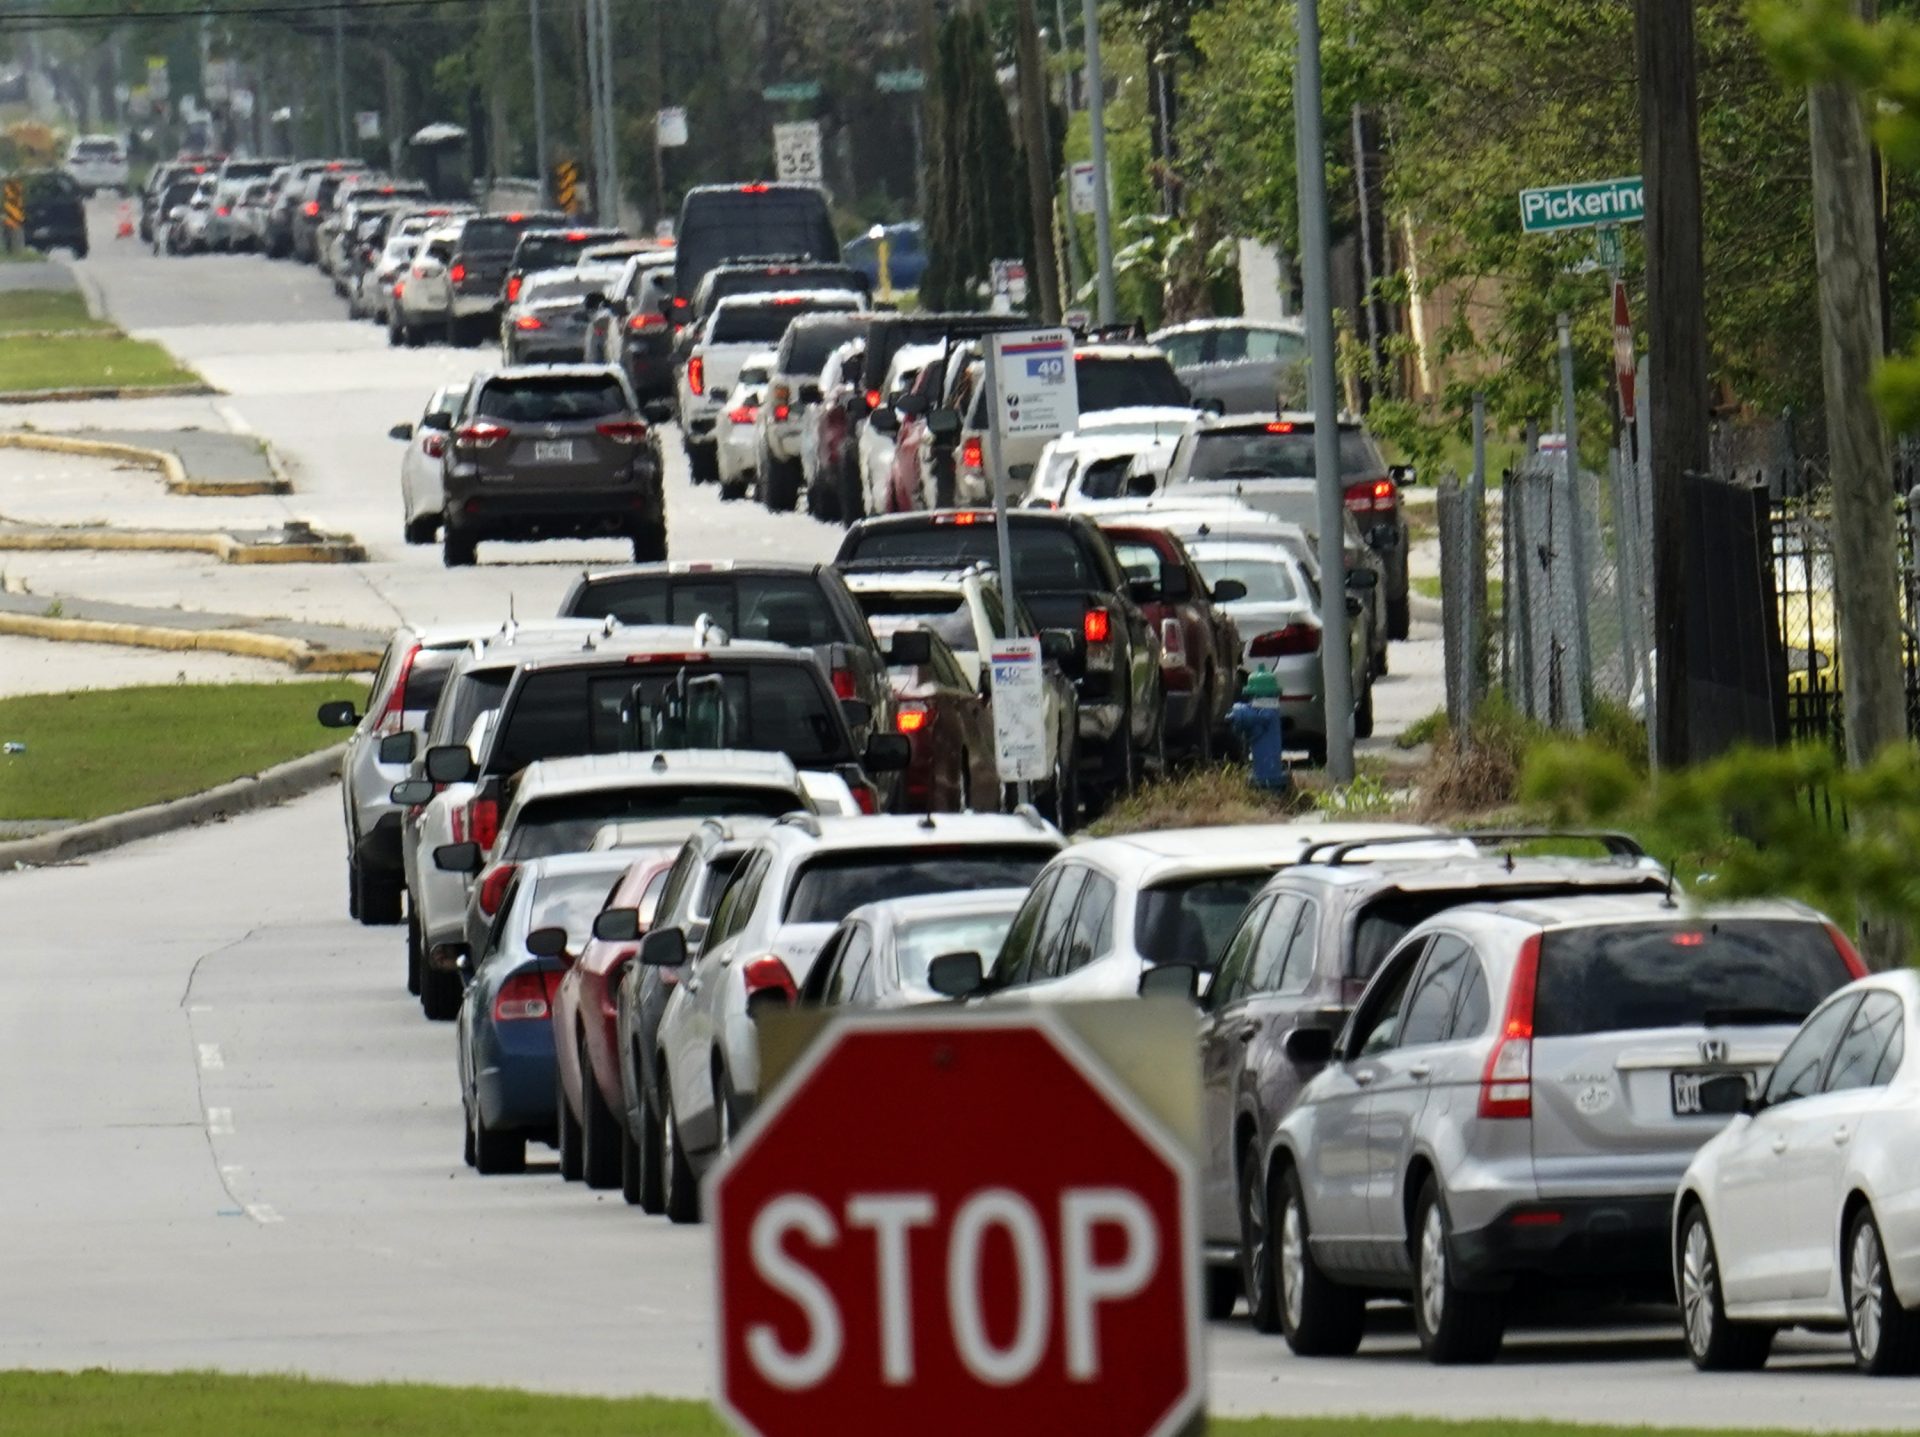 A line of cars stretches over two miles as people wait to enter a drive-thru testing site for COVID-19 at United Memorial Medical Center Thursday, March 19, 2020, in Houston. For most people, the coronavirus causes only mild or moderate symptoms, such as fever and cough. For some, especially older adults and people with existing health problems, it can cause more severe illness, including pneumonia.